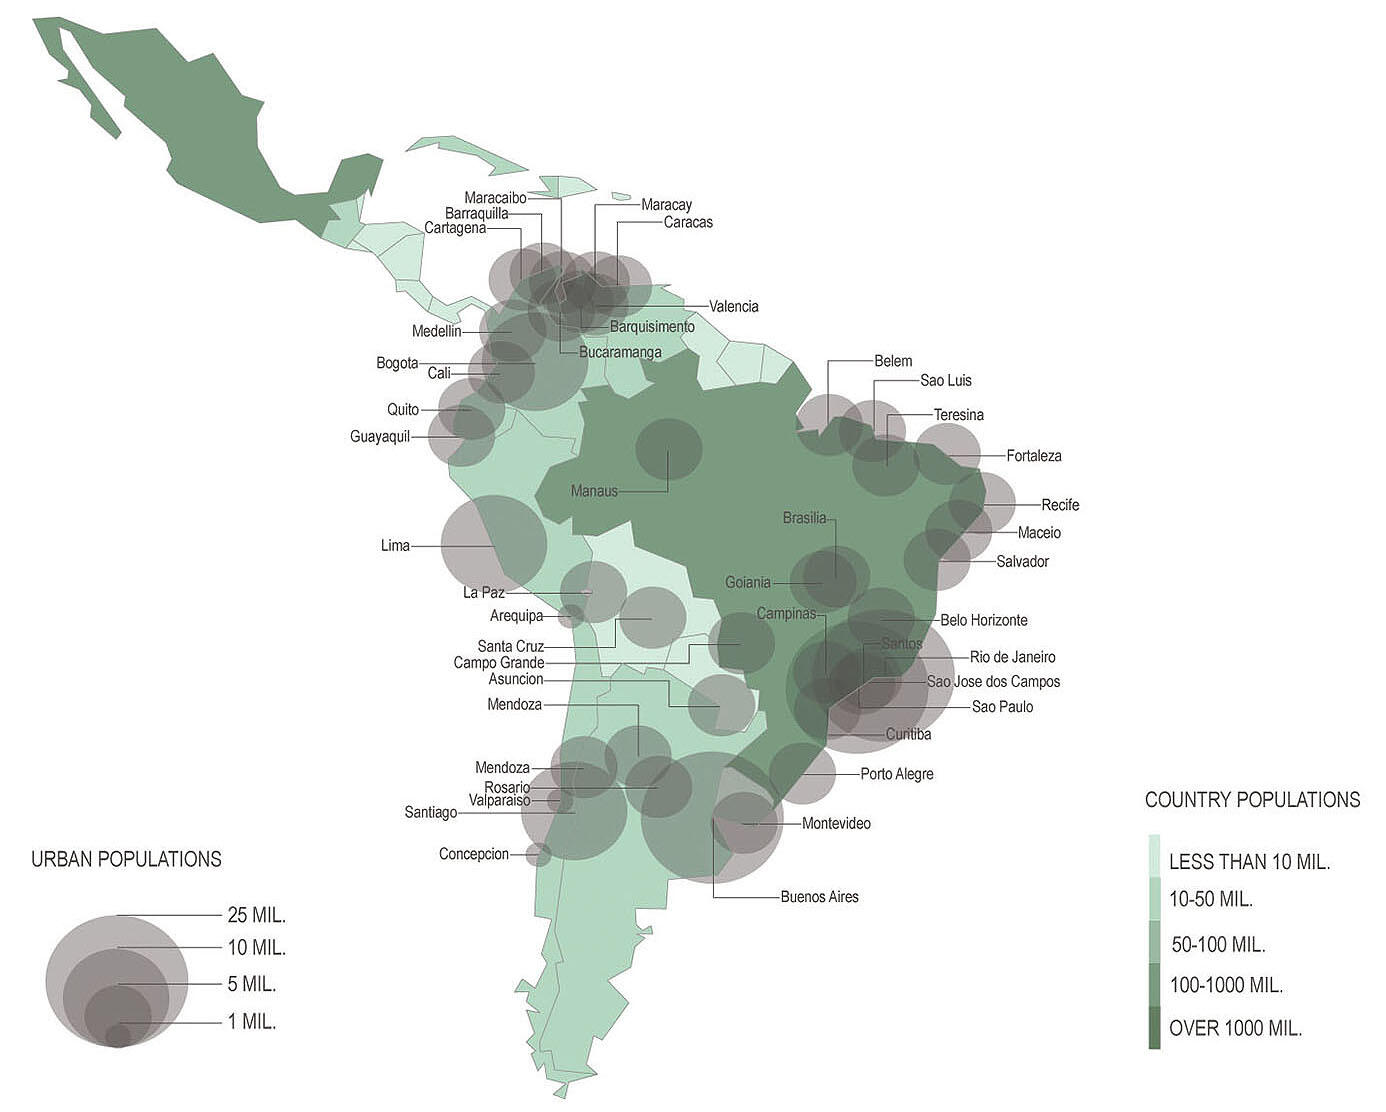 A map of future city size shows that many of South America’s densest urban areas are coastal and vulnerable to flooding. (Image courtesy of Paz Gutierrez. Data from the U.S. Census Bureau International Database.)